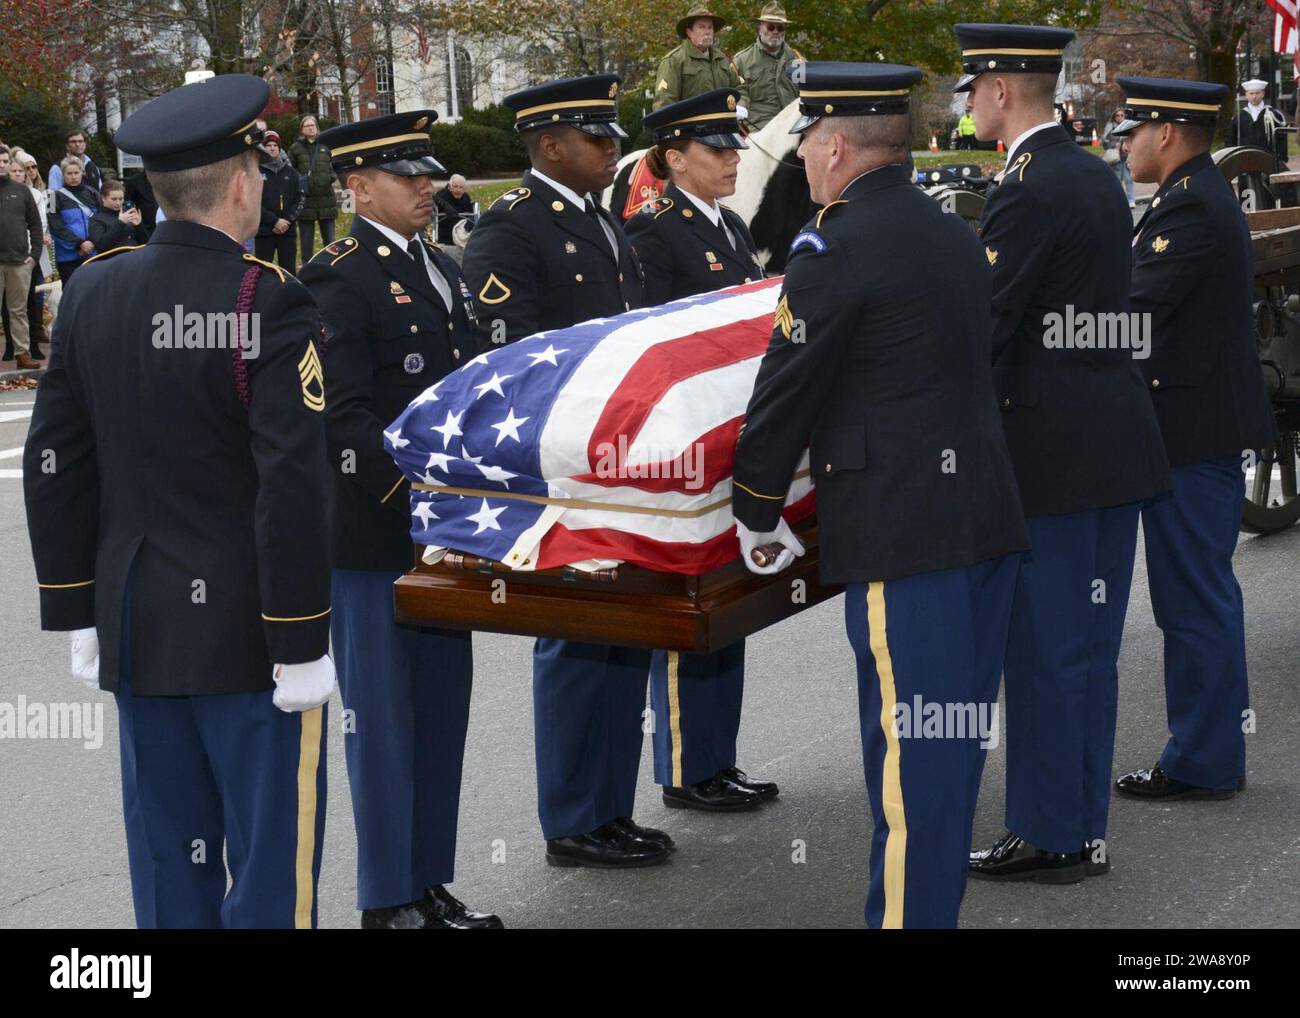 US military forces. CONCORD, Mass. (Nov. 15, 2017) The Military Funeral Honors Team of the Massachusetts Army National Guard carries the casket of Medal of Honor Recipient Capt. Thomas J. Hudner, Jr., during a funeral procession in Capt. Hudner’s honor. Capt. Hudner, a naval aviator, received the Medal of Honor for his actions during the Battle of the Chosin Reservoir during the Korean War. (U.S. Navy photo by Mass Communication Specialist 3rd Class Casey Scoular/Released) Stock Photo